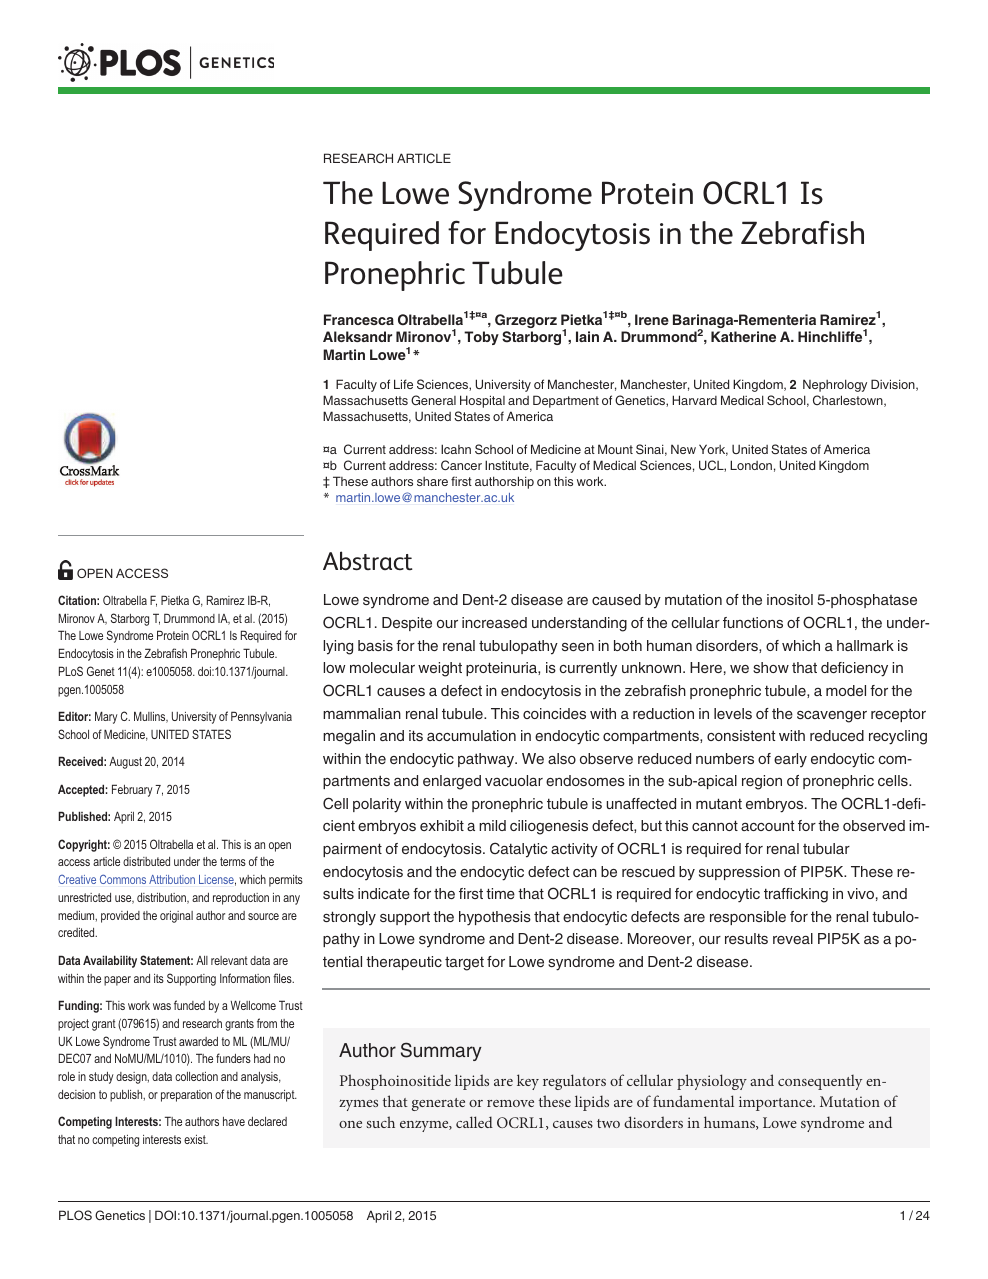 The Lowe Syndrome Protein Ocrl1 Is Required For Endocytosis In The Zebrafish Pronephric Tubule Topic Of Research Paper In Biological Sciences Download Scholarly Article Pdf And Read For Free On Cyberleninka